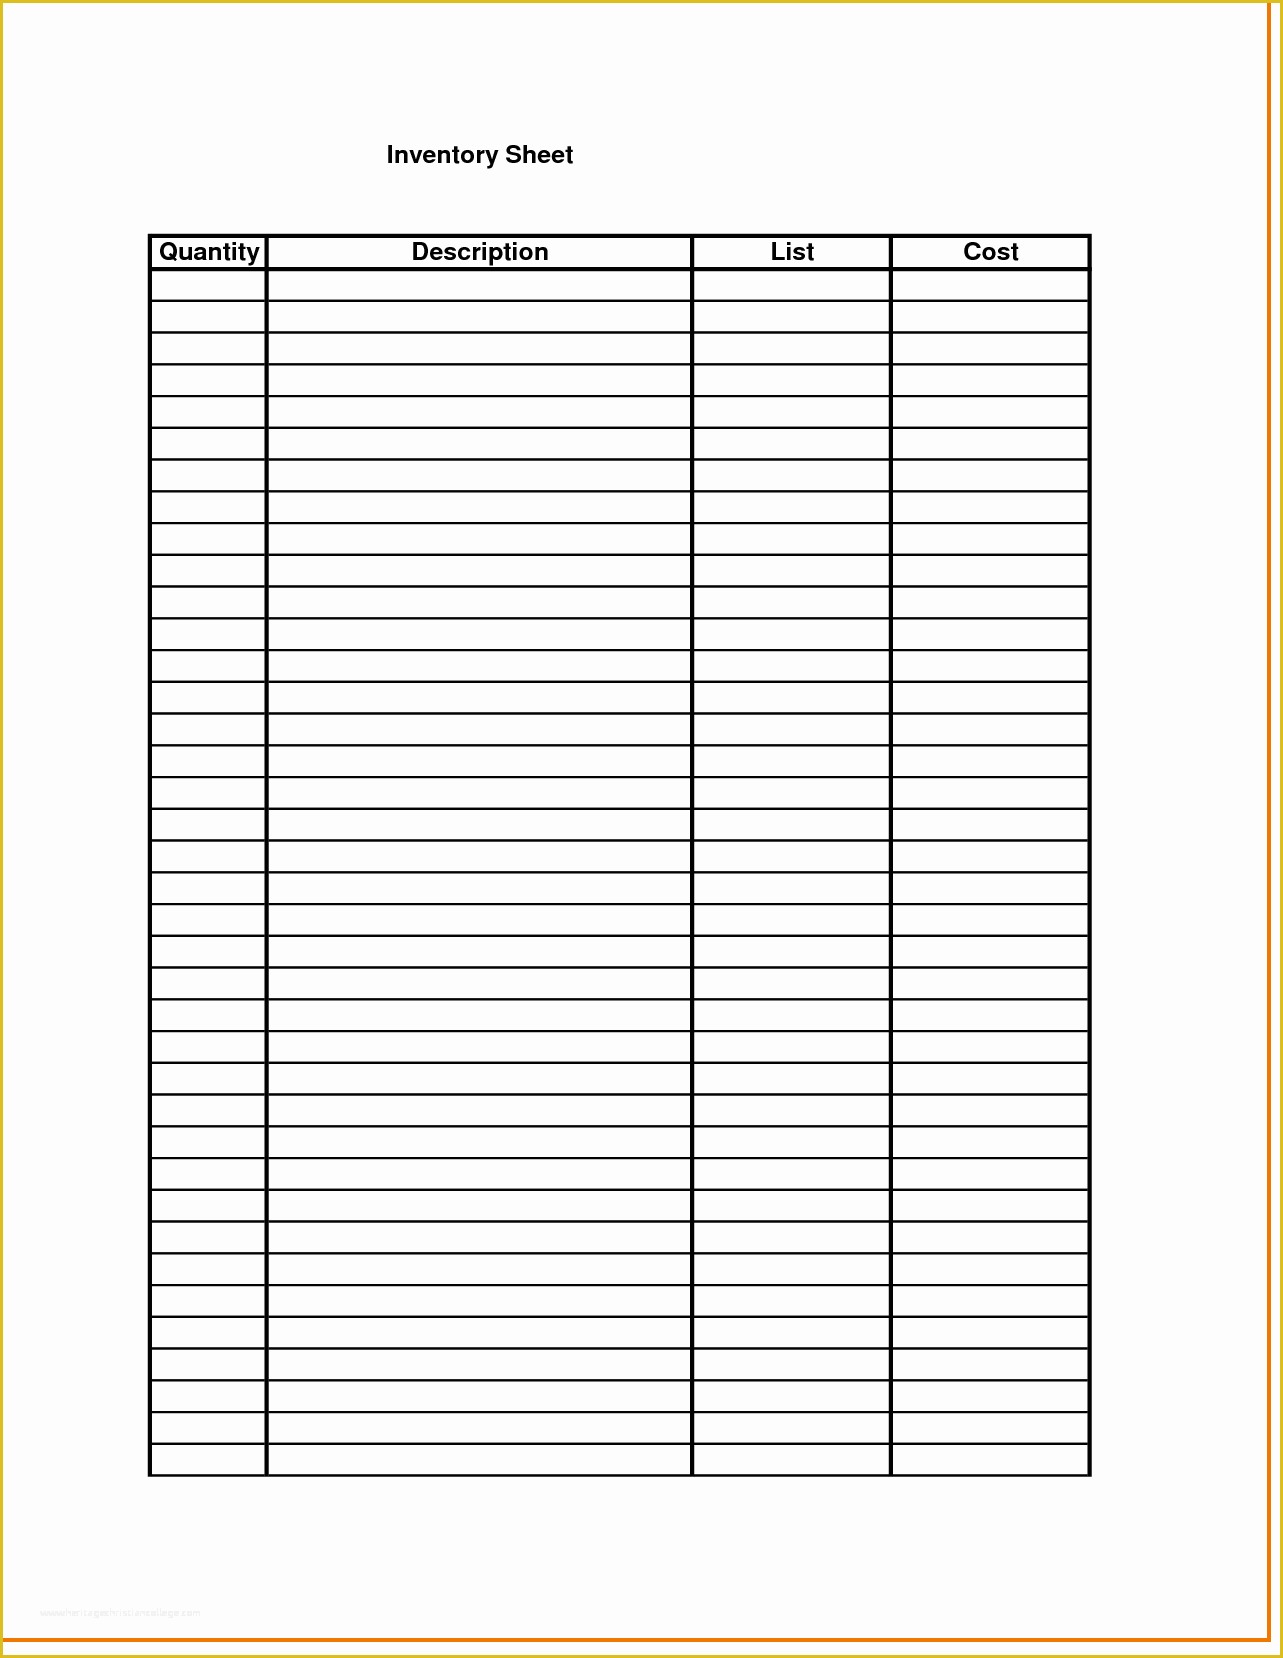 Free Inventory Spreadsheet Template Of Inventory Control Template with Count Sheet 1 Inventory